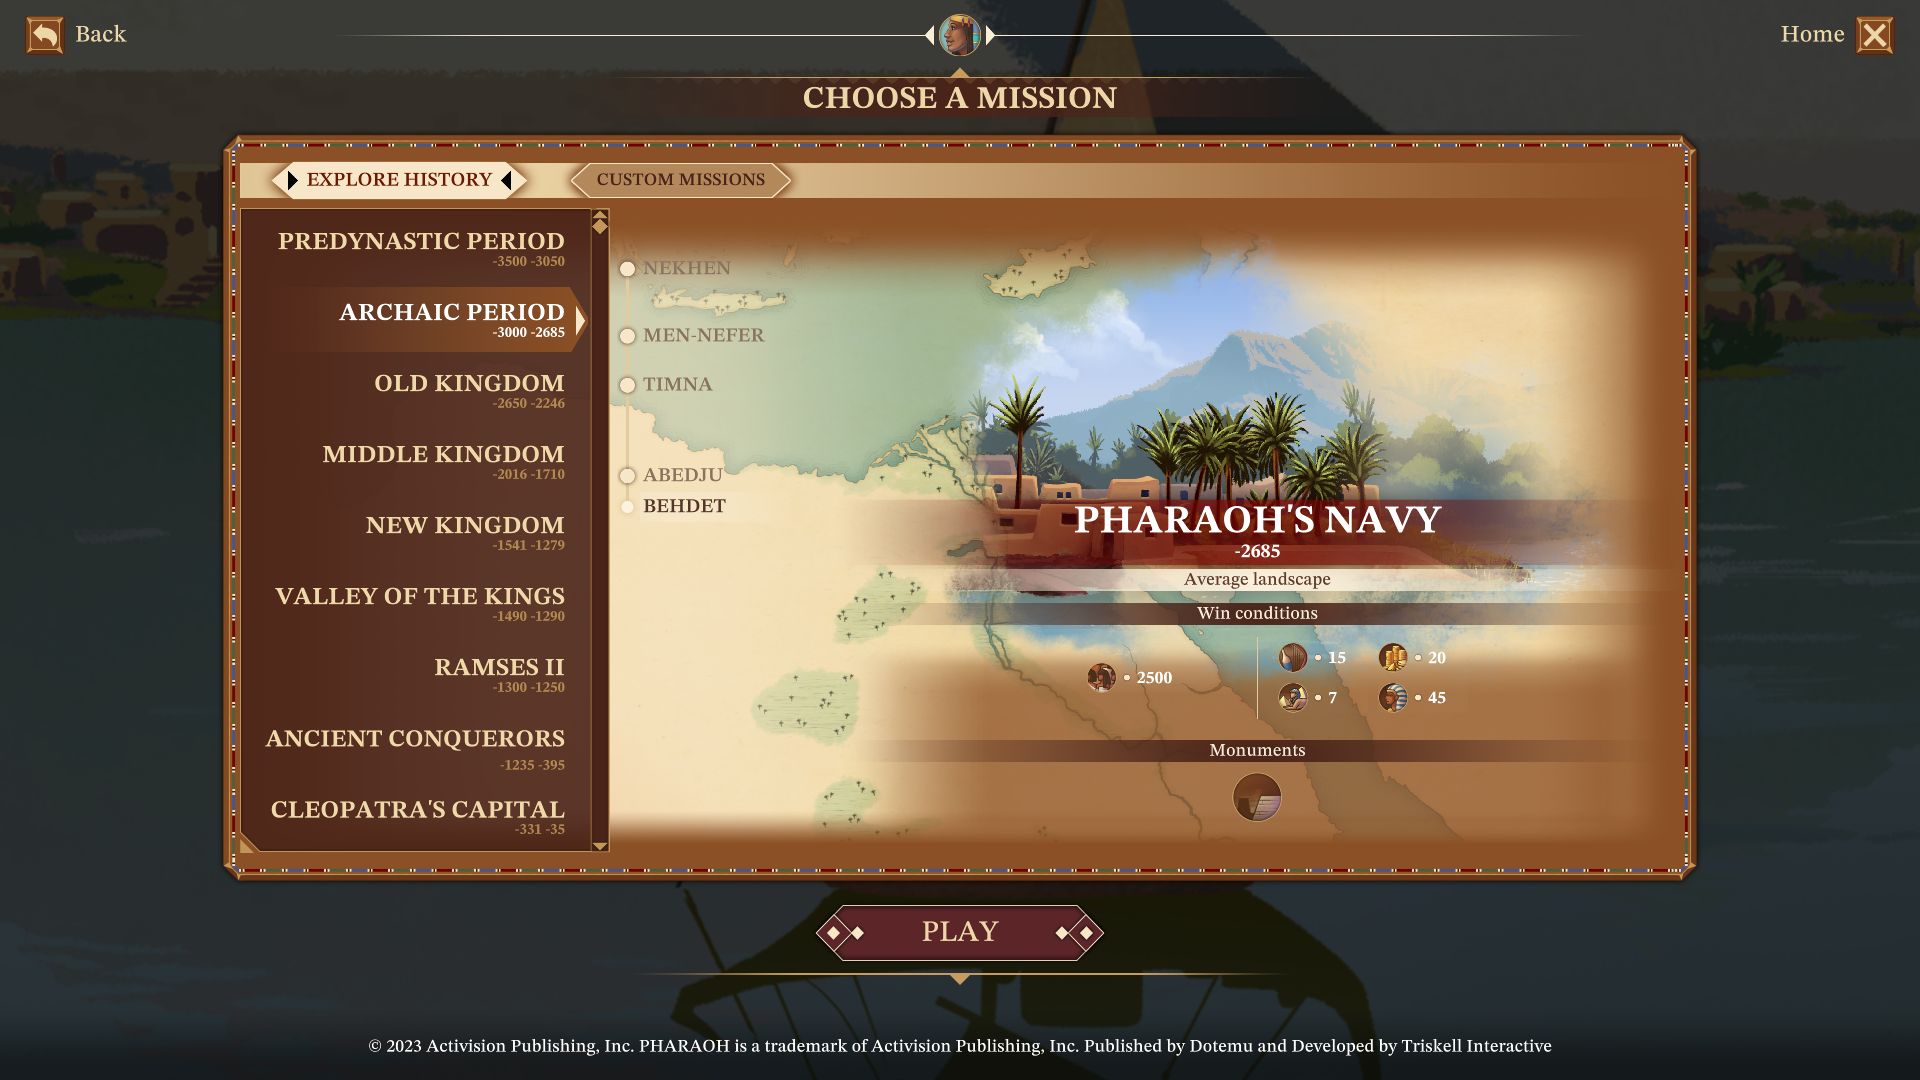 A level selection screen from the main menu of Pharaoh: A New Era, open on a mission called Pharaoh's Navy